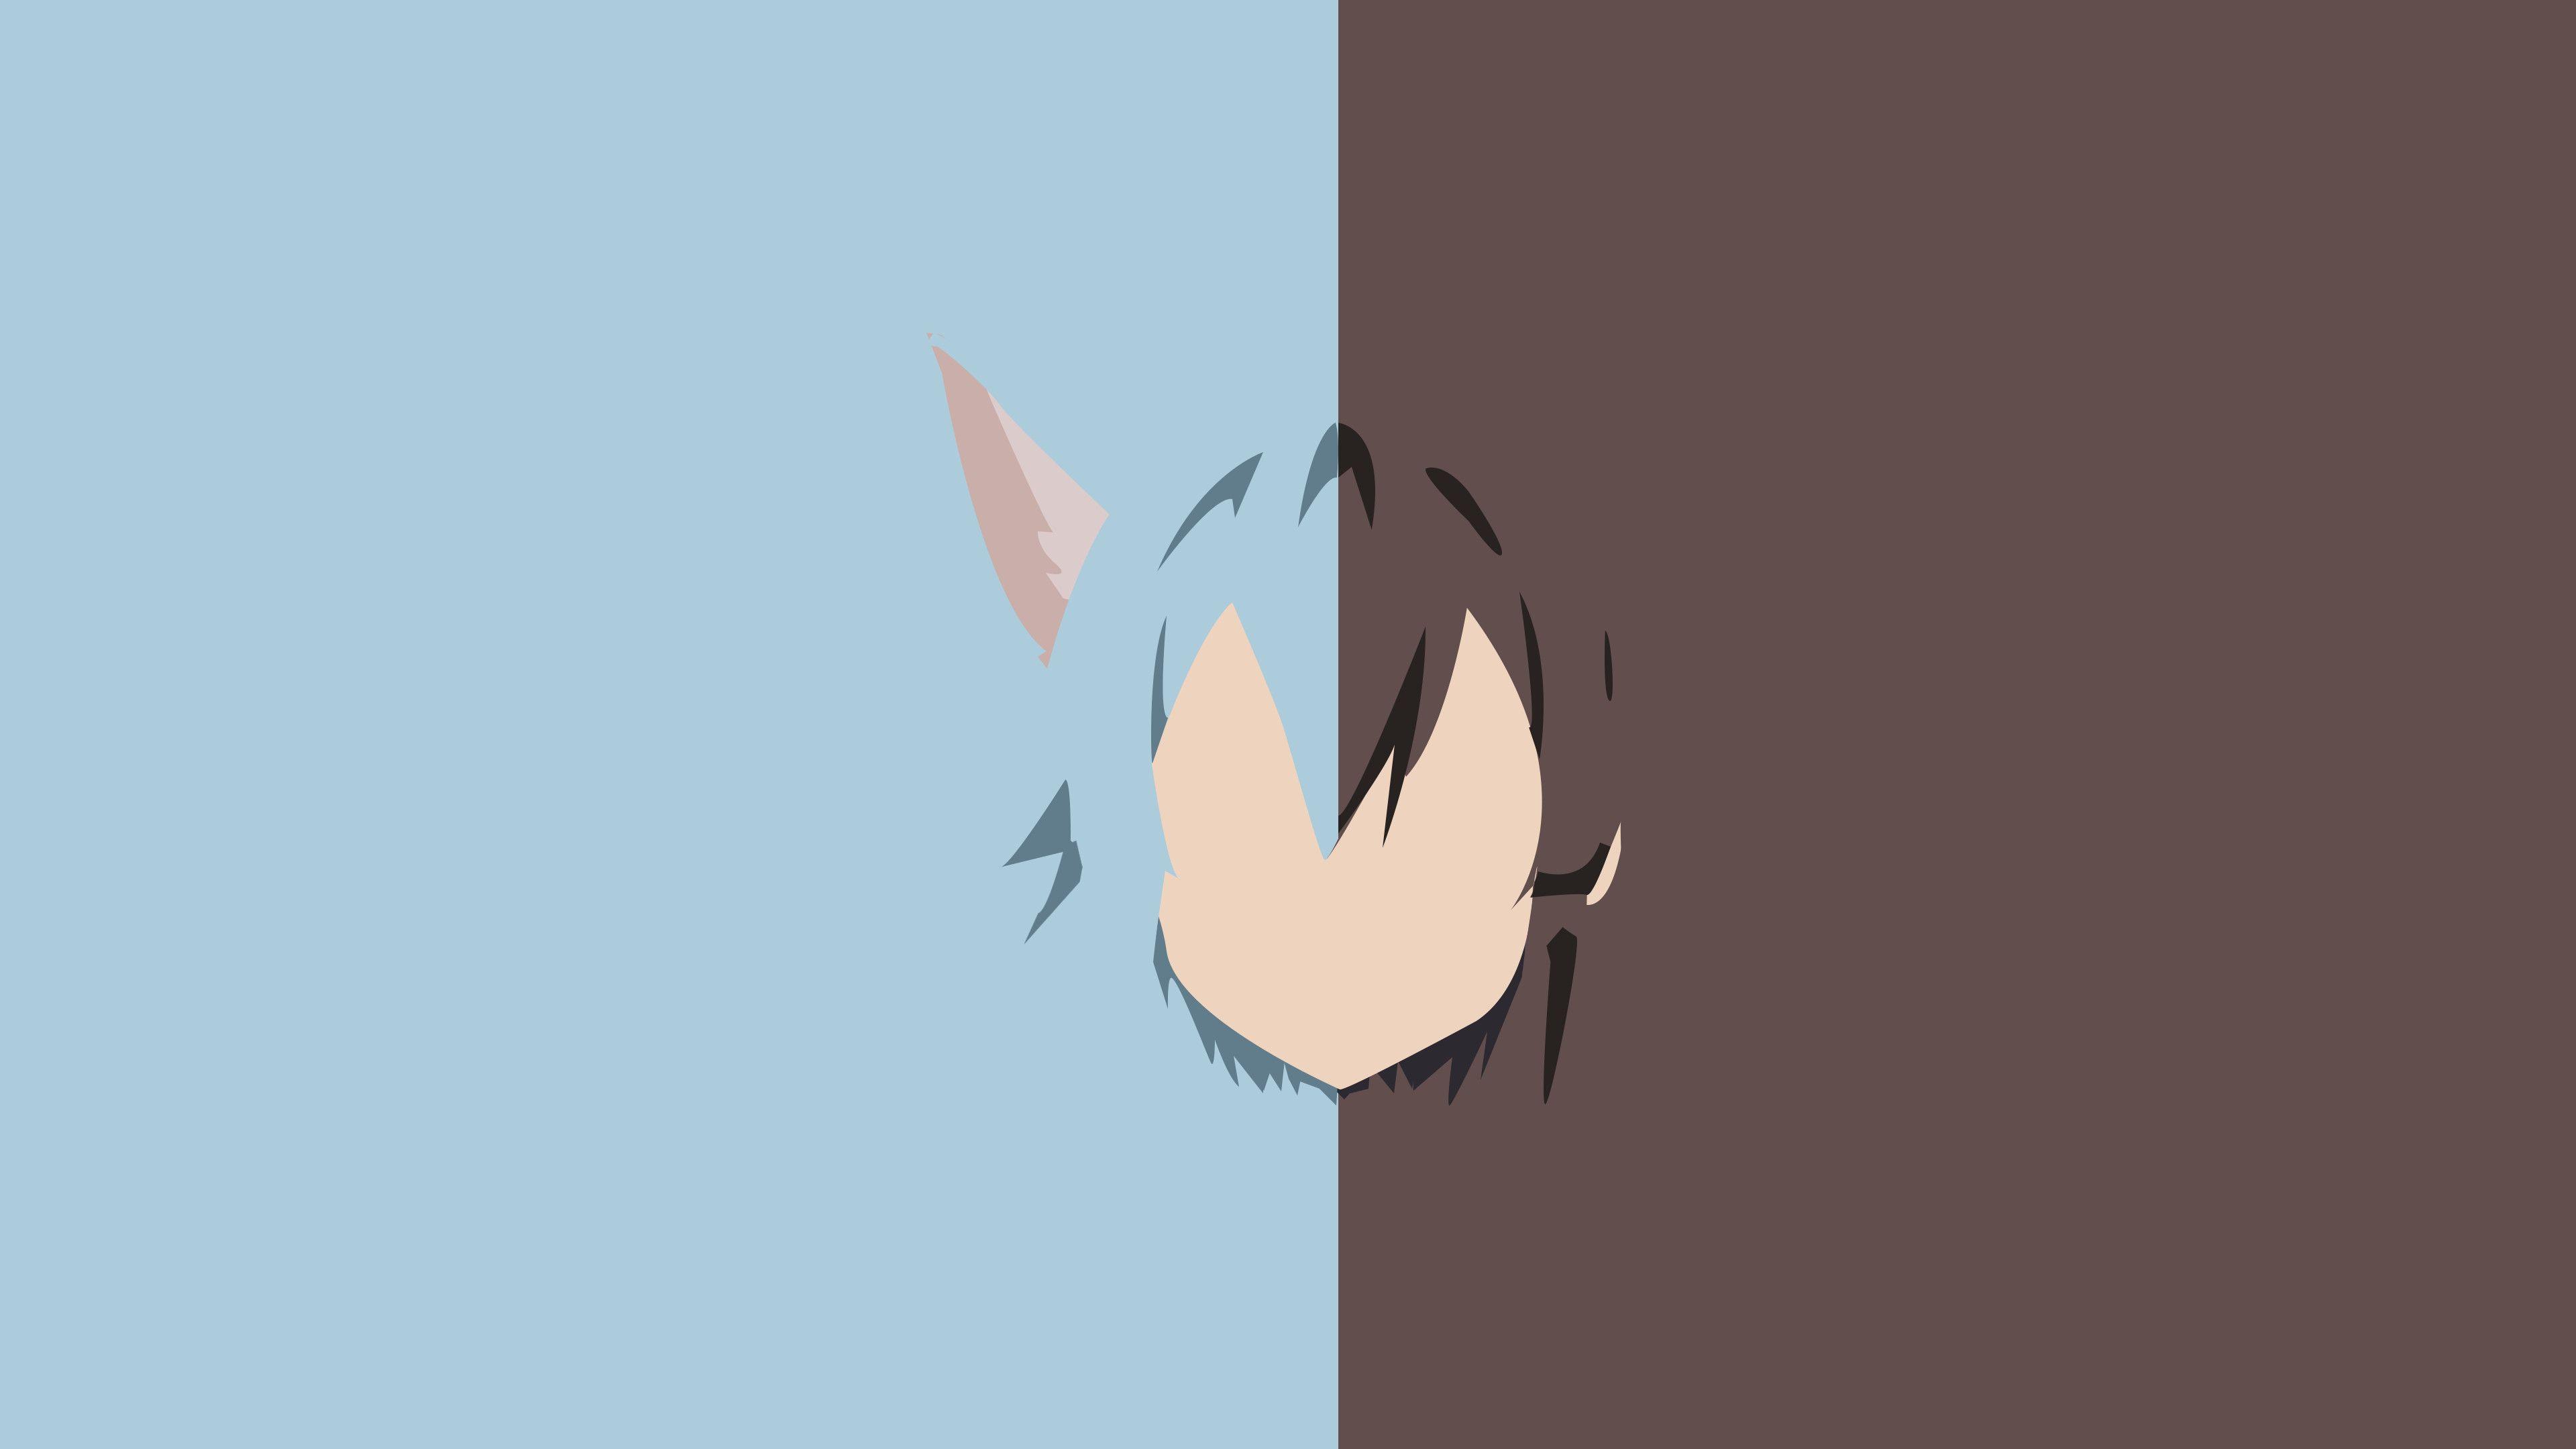 Minimalistic Anime iPhone Wallpapers - Wallpaper Cave